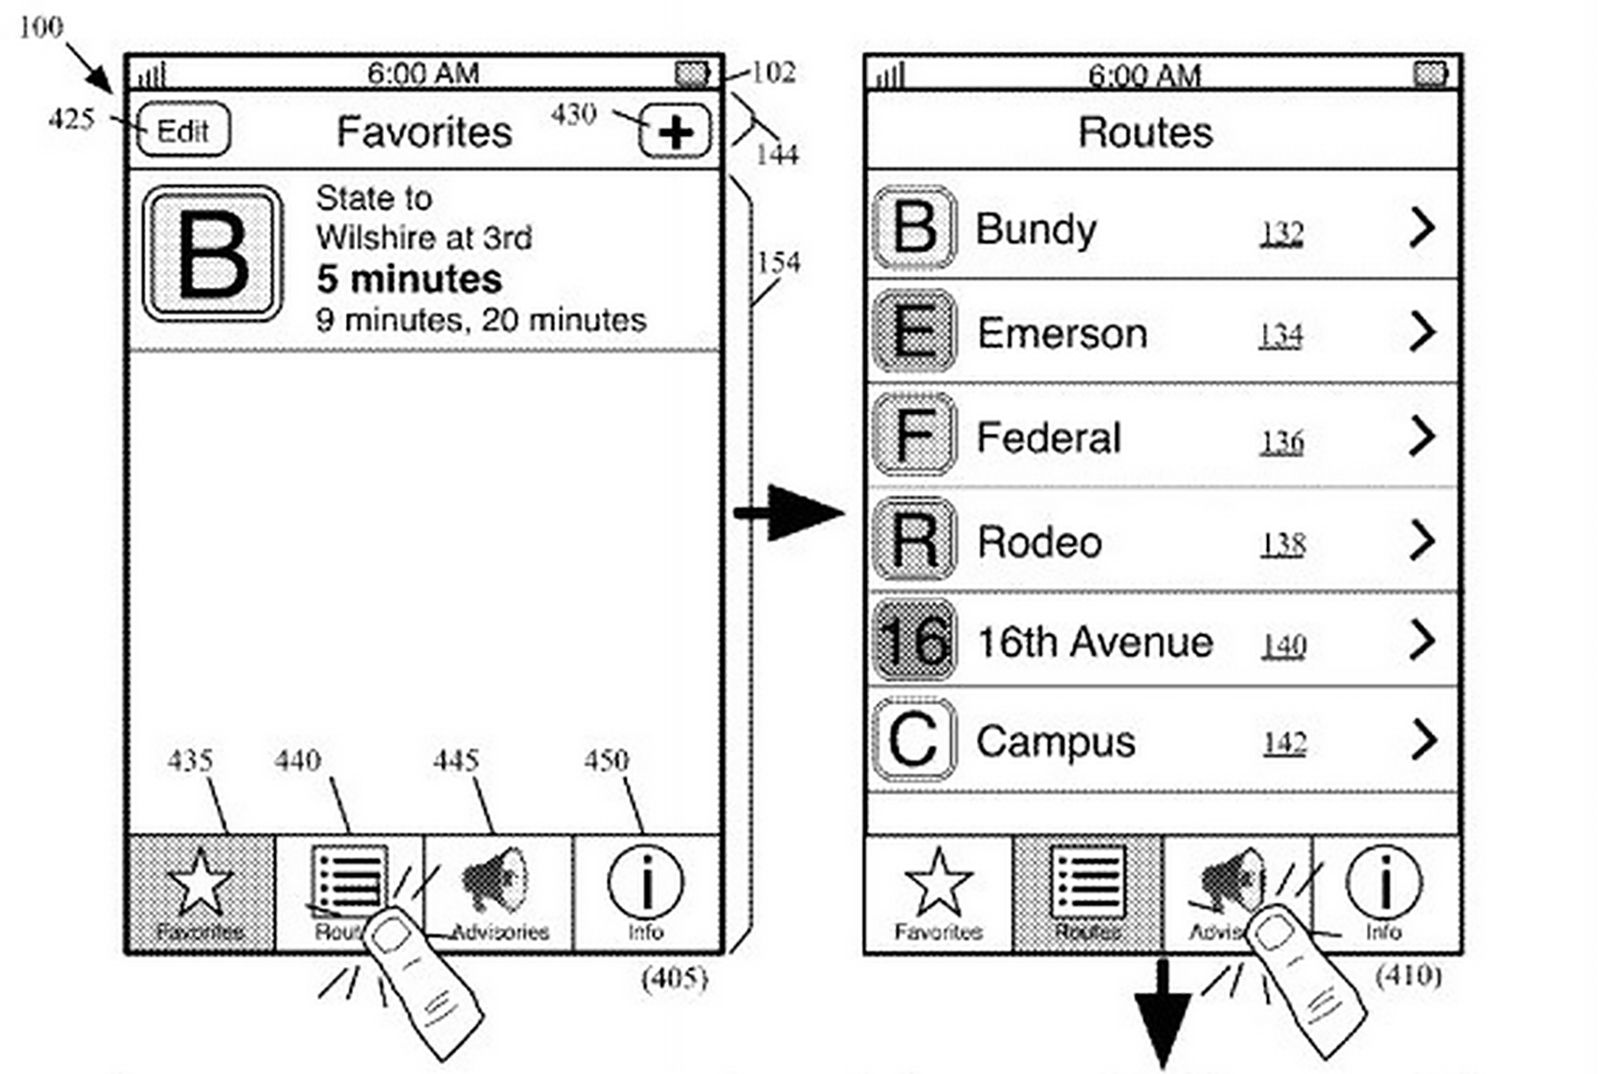 apple s public transit feature revealed in patent possibly for maps image 1